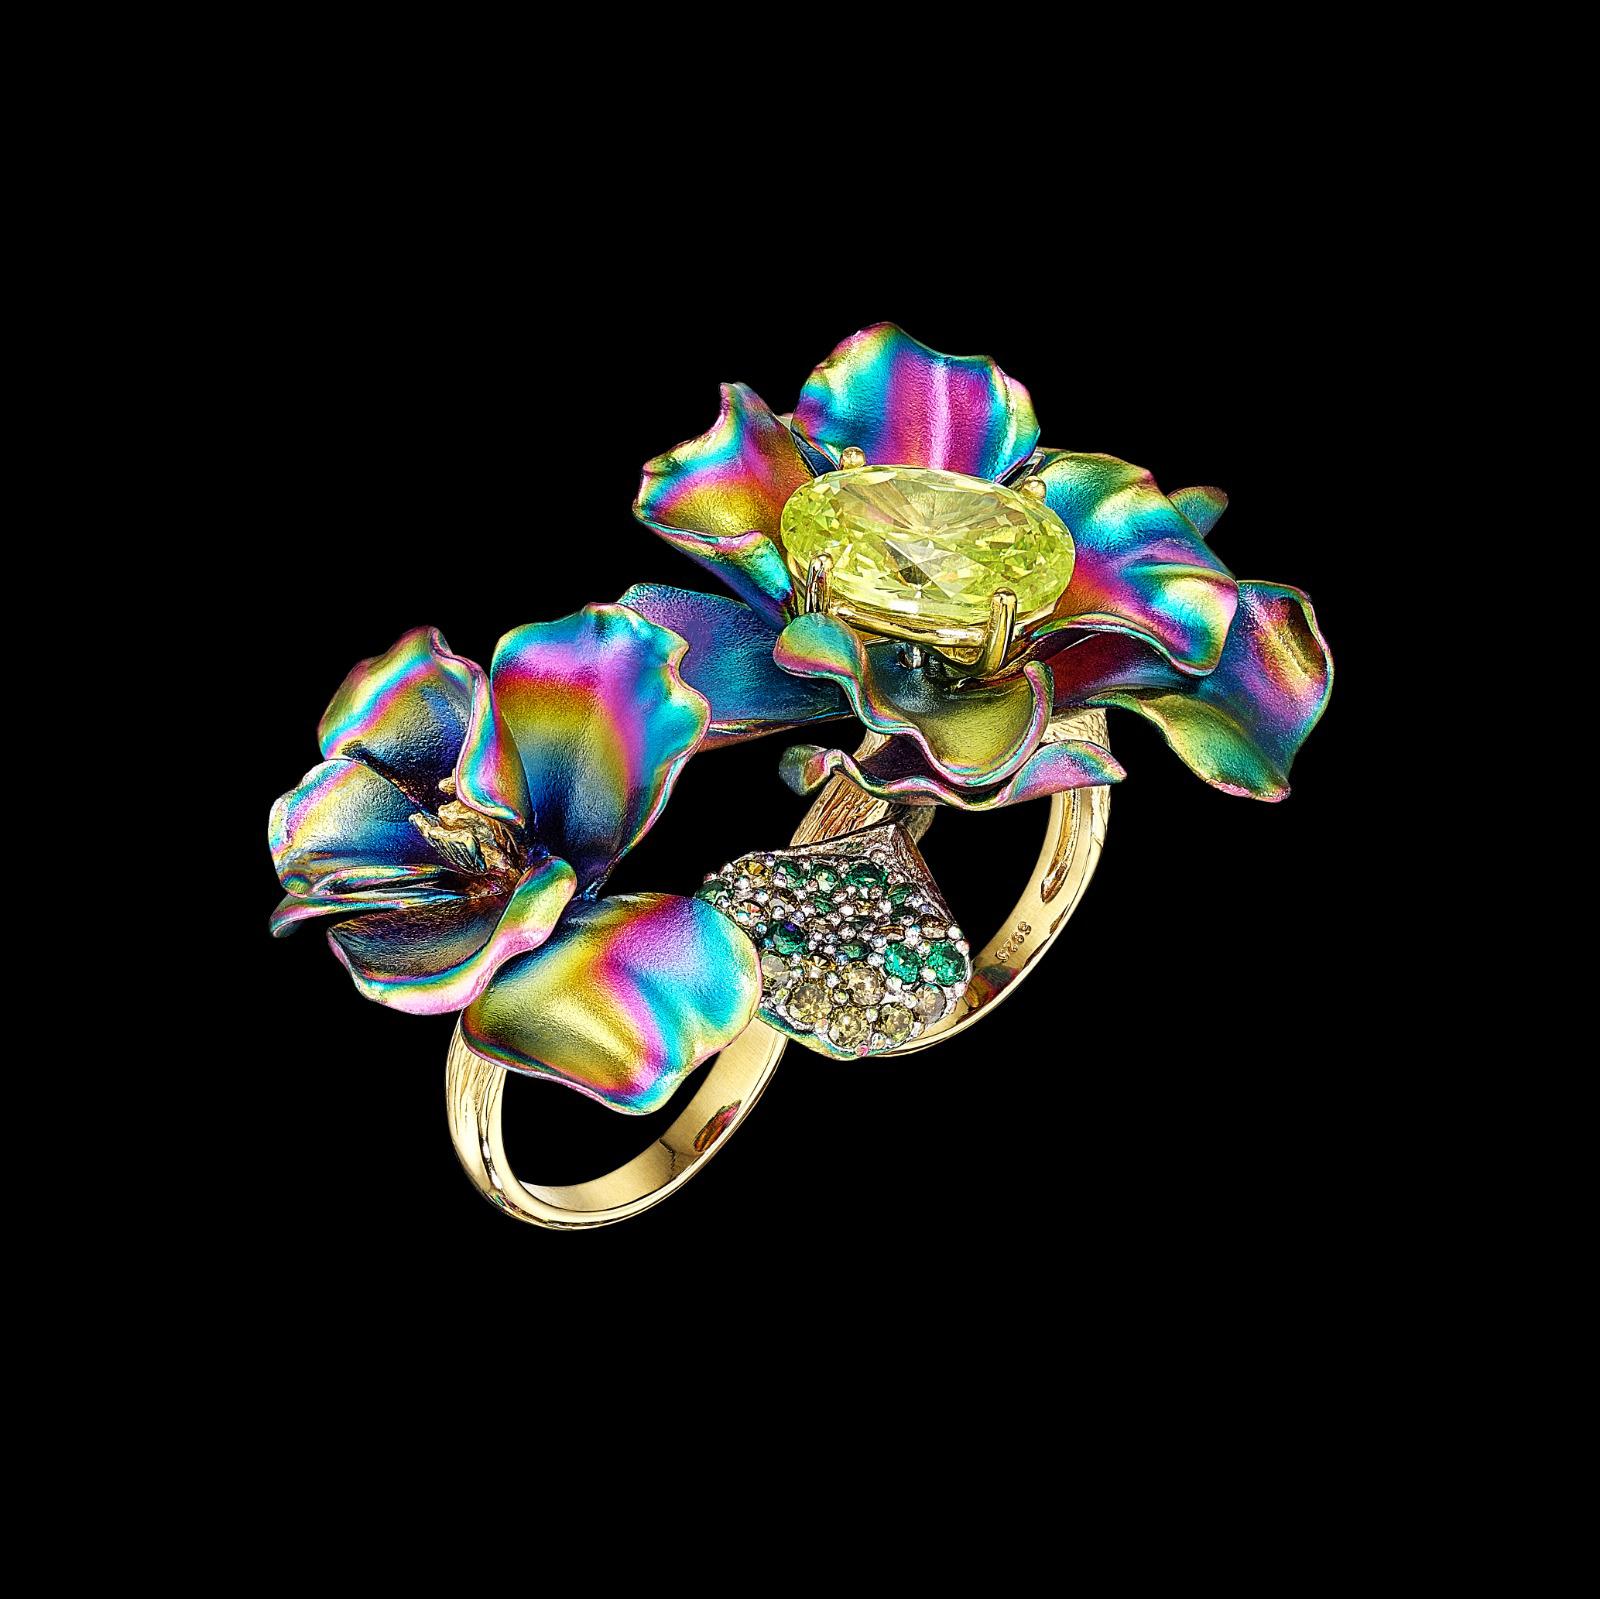 Citrus Rainbow Flower Ring, Ring, Anabela Chan Joaillerie - Fine jewelry with laboratory grown and created gemstones hand-crafted in the United Kingdom. Anabela Chan Joaillerie is the first fine jewellery brand in the world to champion laboratory-grown and created gemstones with high jewellery design, artisanal craftsmanship and a focus on ethical and sustainable innovations.